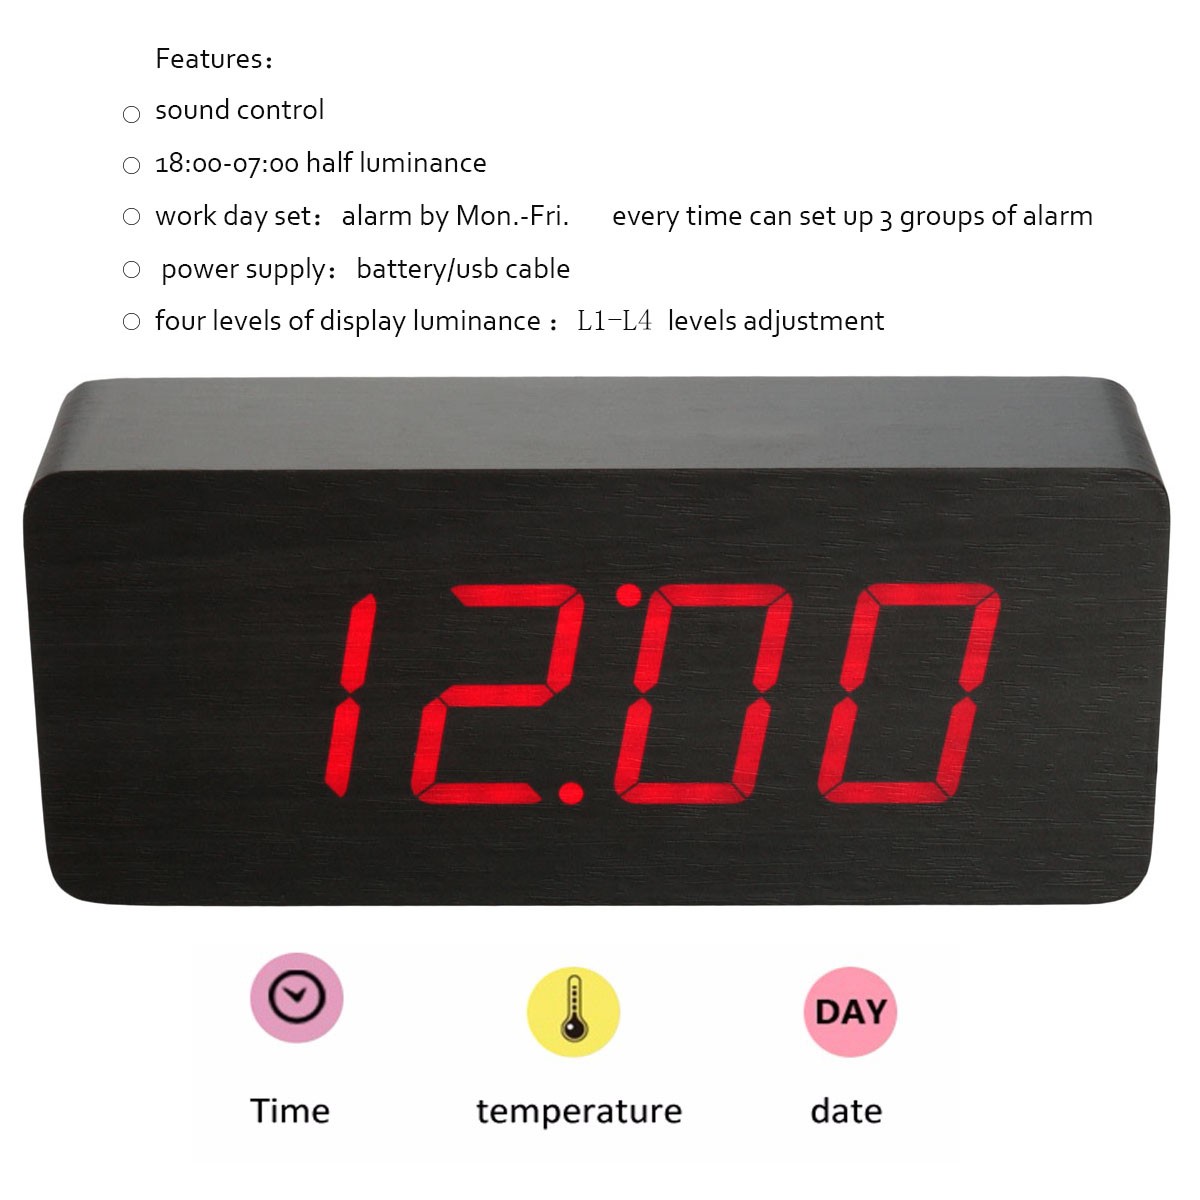 Multifunctional-Wooden-Digital-Clock-Two-Modes-Default-Display-Time-Built-in-Battery-Voice-Control-S-1891907-2